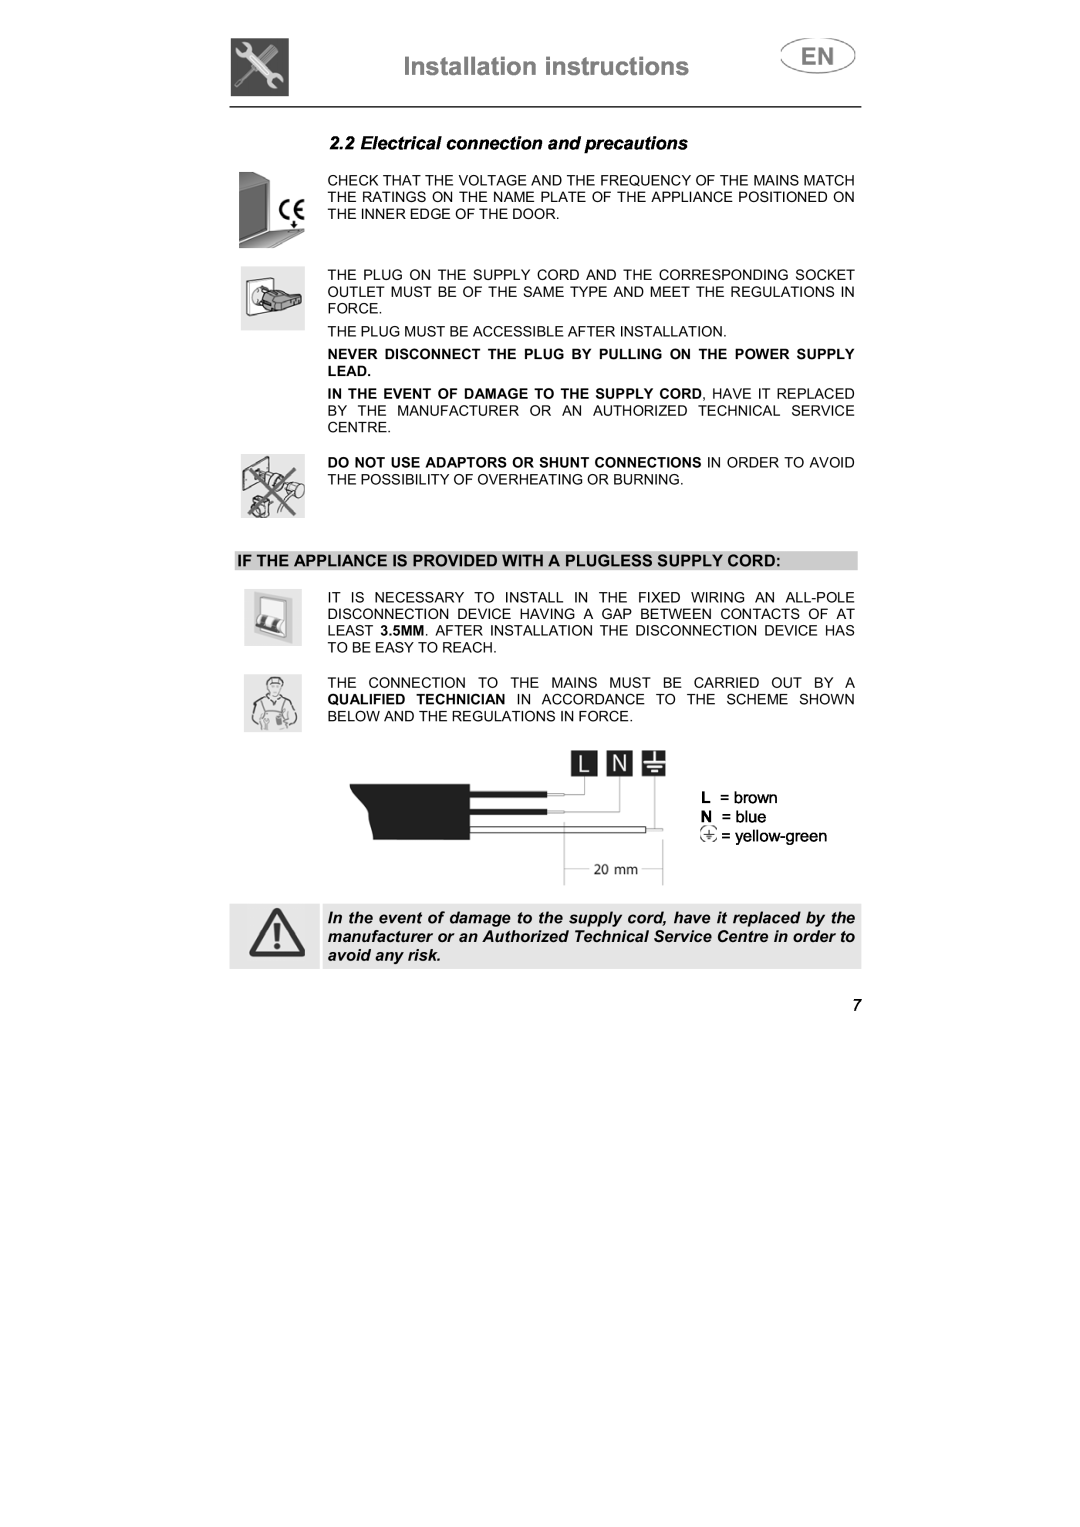 Smeg LSPX1253 manual Installation instructions, Electrical connection and precautions 